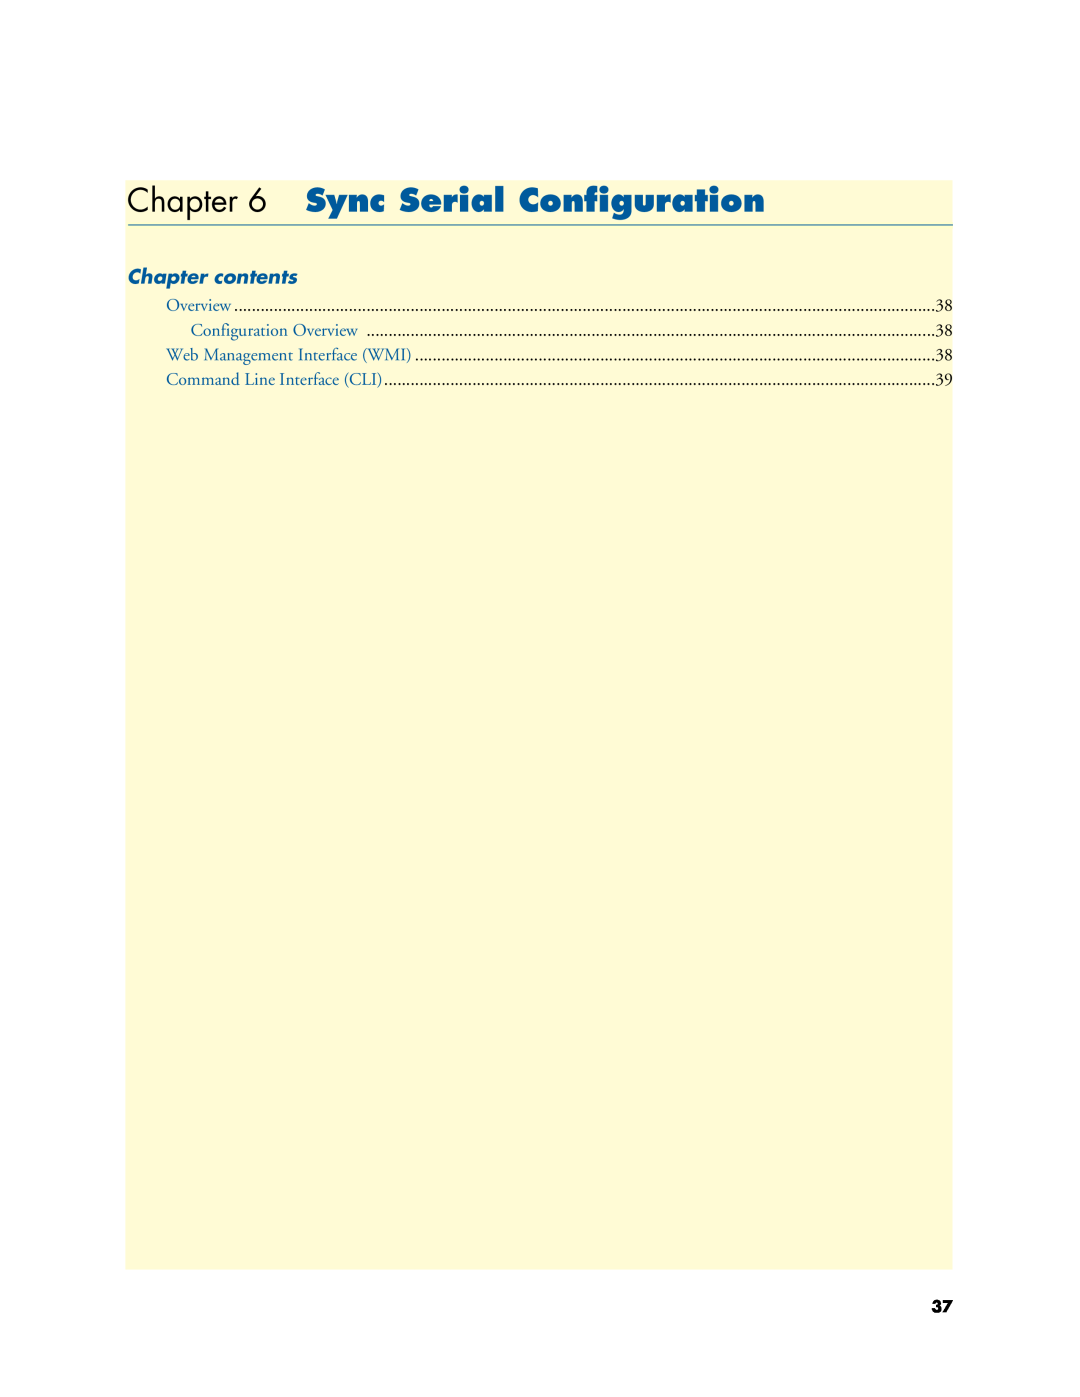 Patton electronic 3034/3038 manual Sync Serial Conﬁguration, Chapter contents 